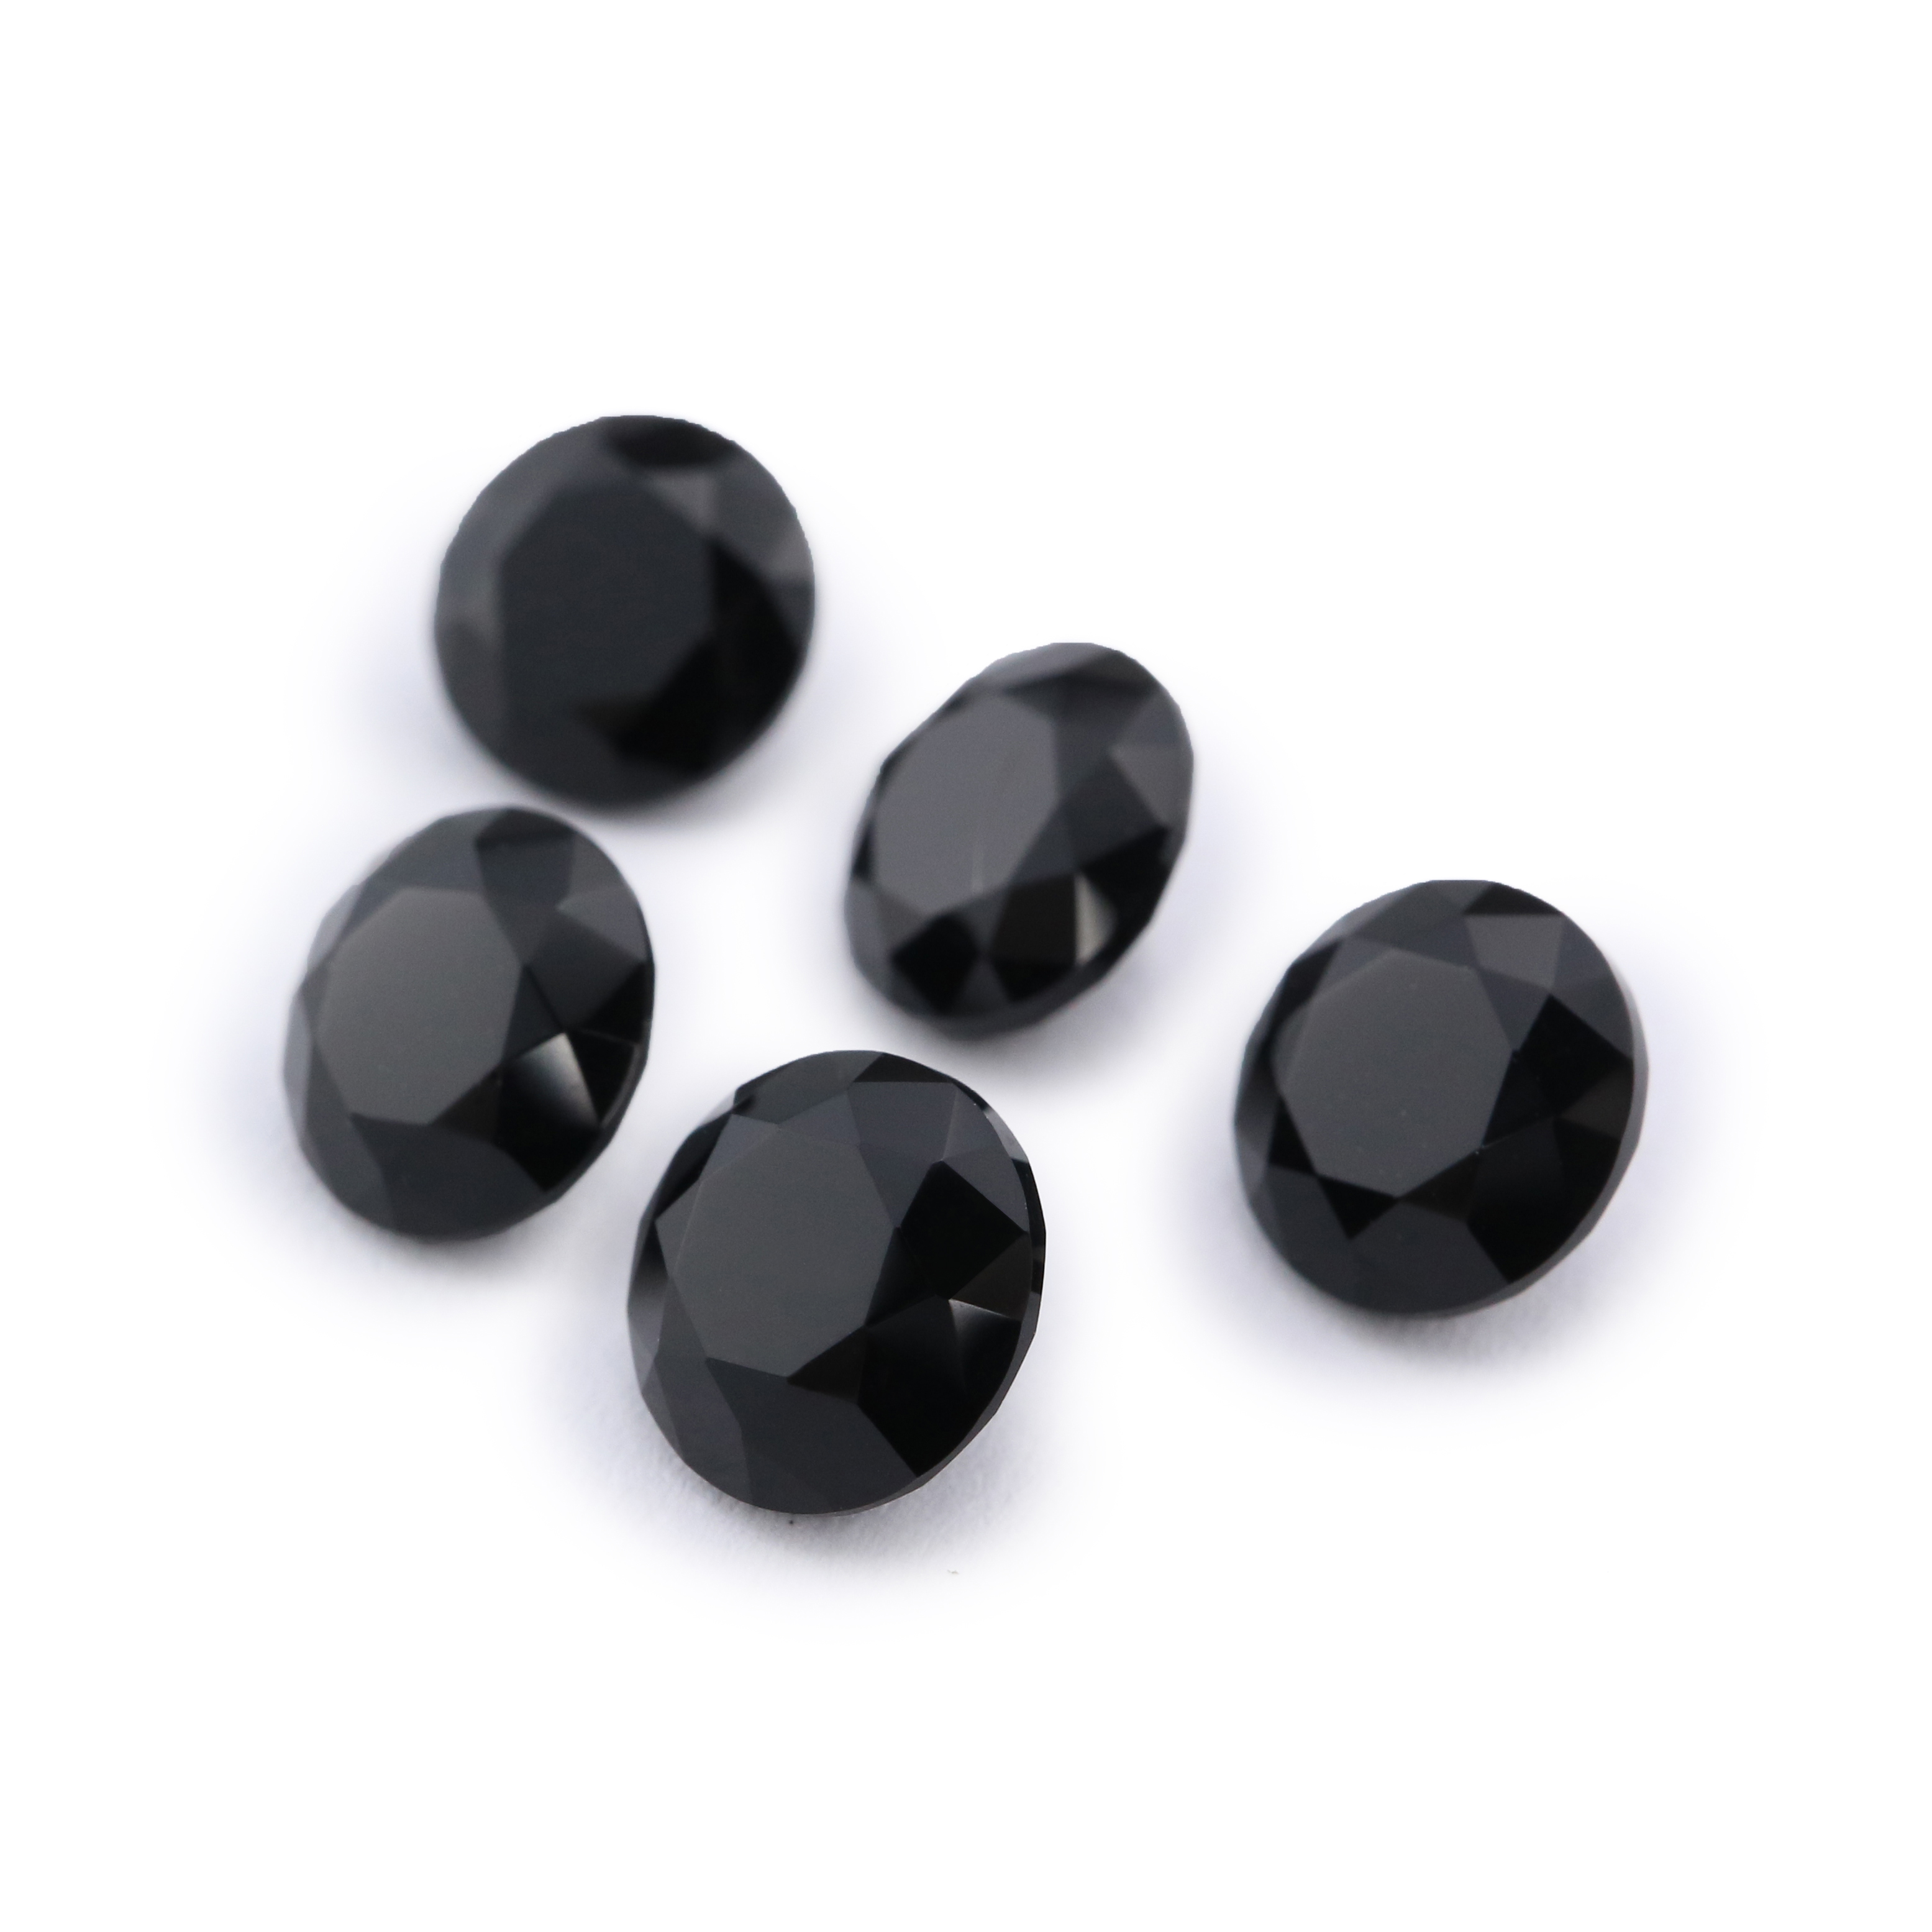 5Pcs Natural Round Black Onyx Faceted Cut Loose Gemstone Nature Semi Precious Stone DIY Jewelry Supplies 4110170 - Click Image to Close